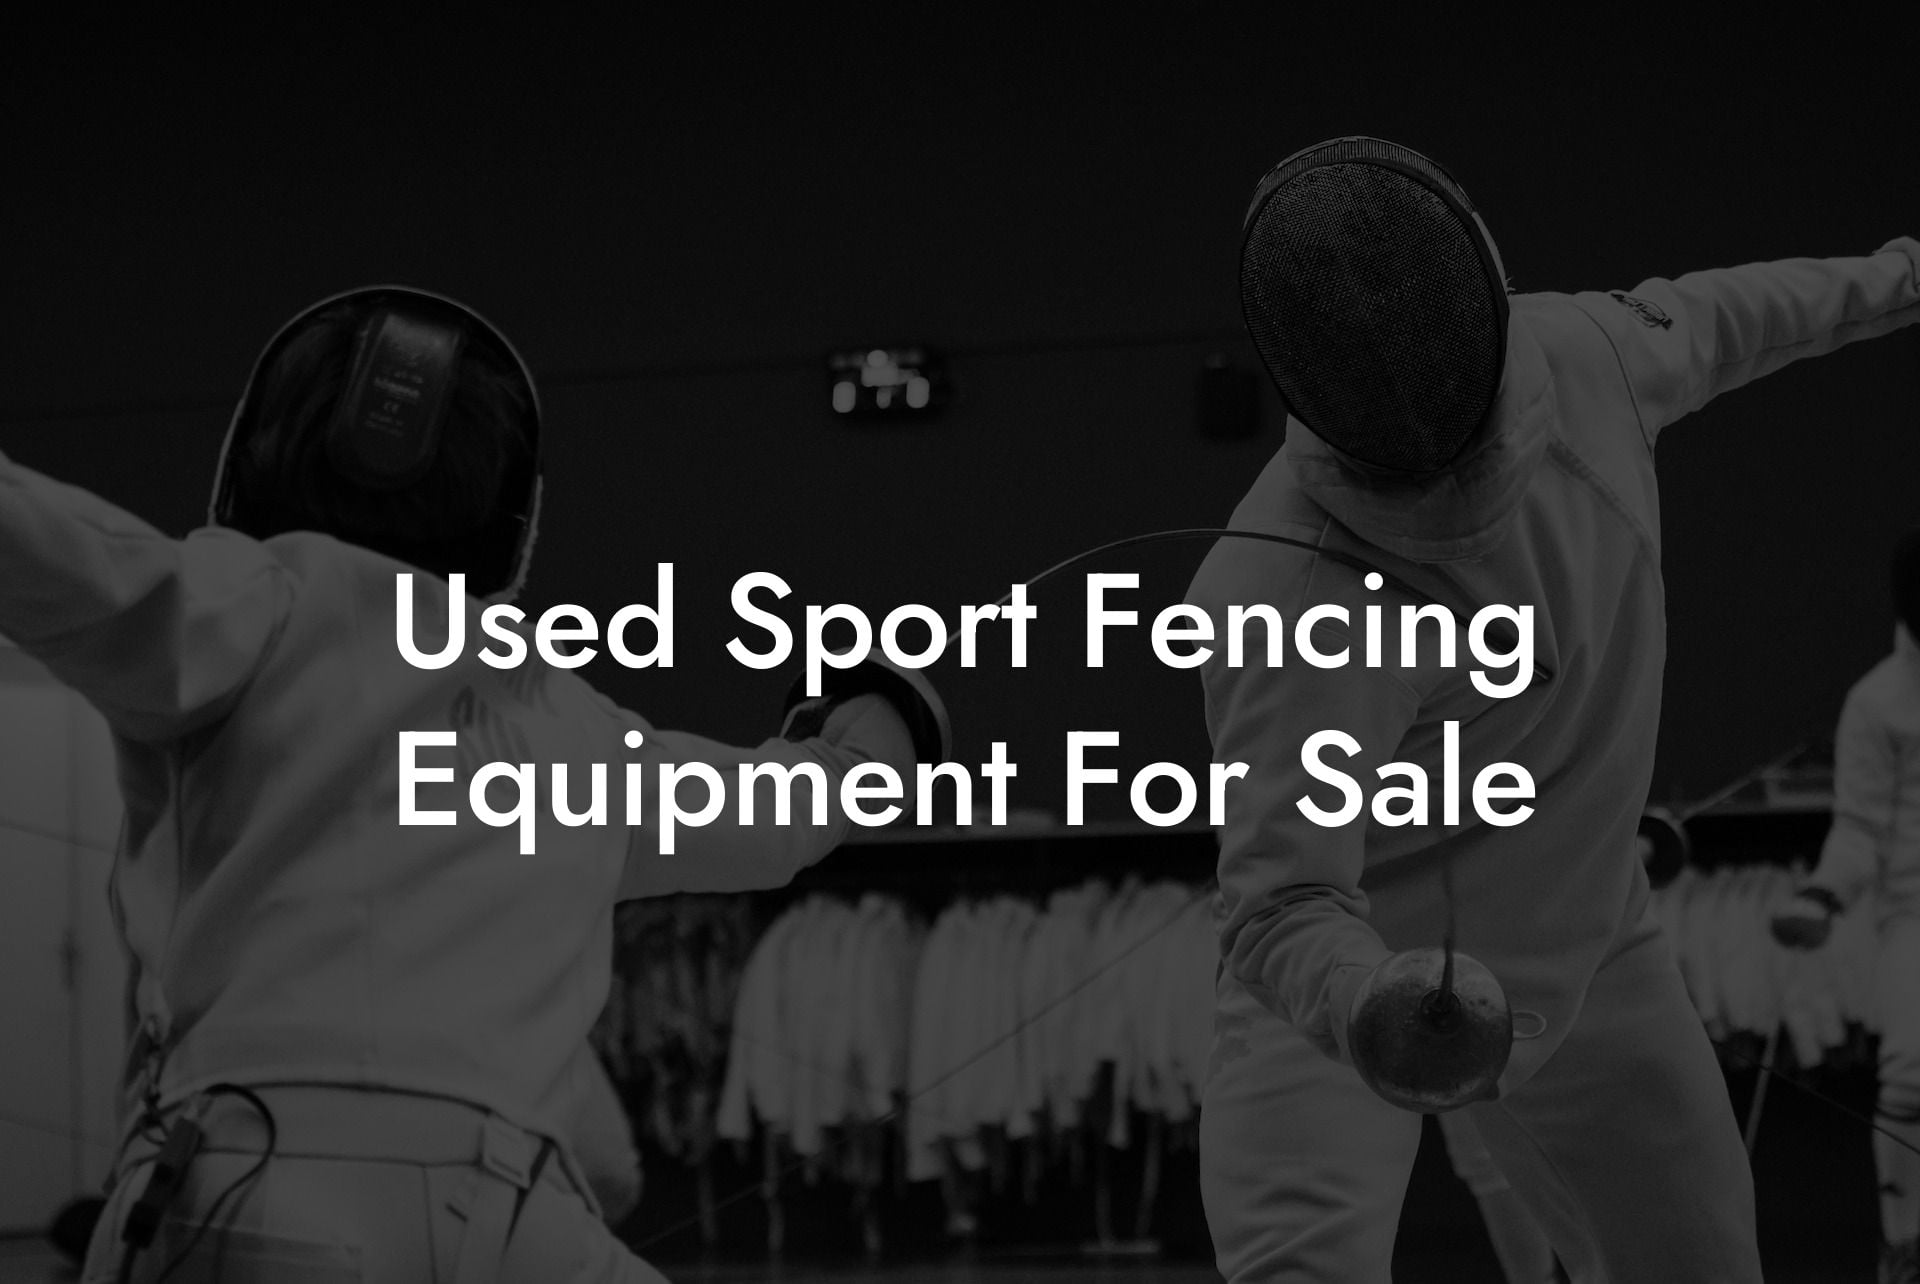 Used Sport Fencing Equipment For Sale